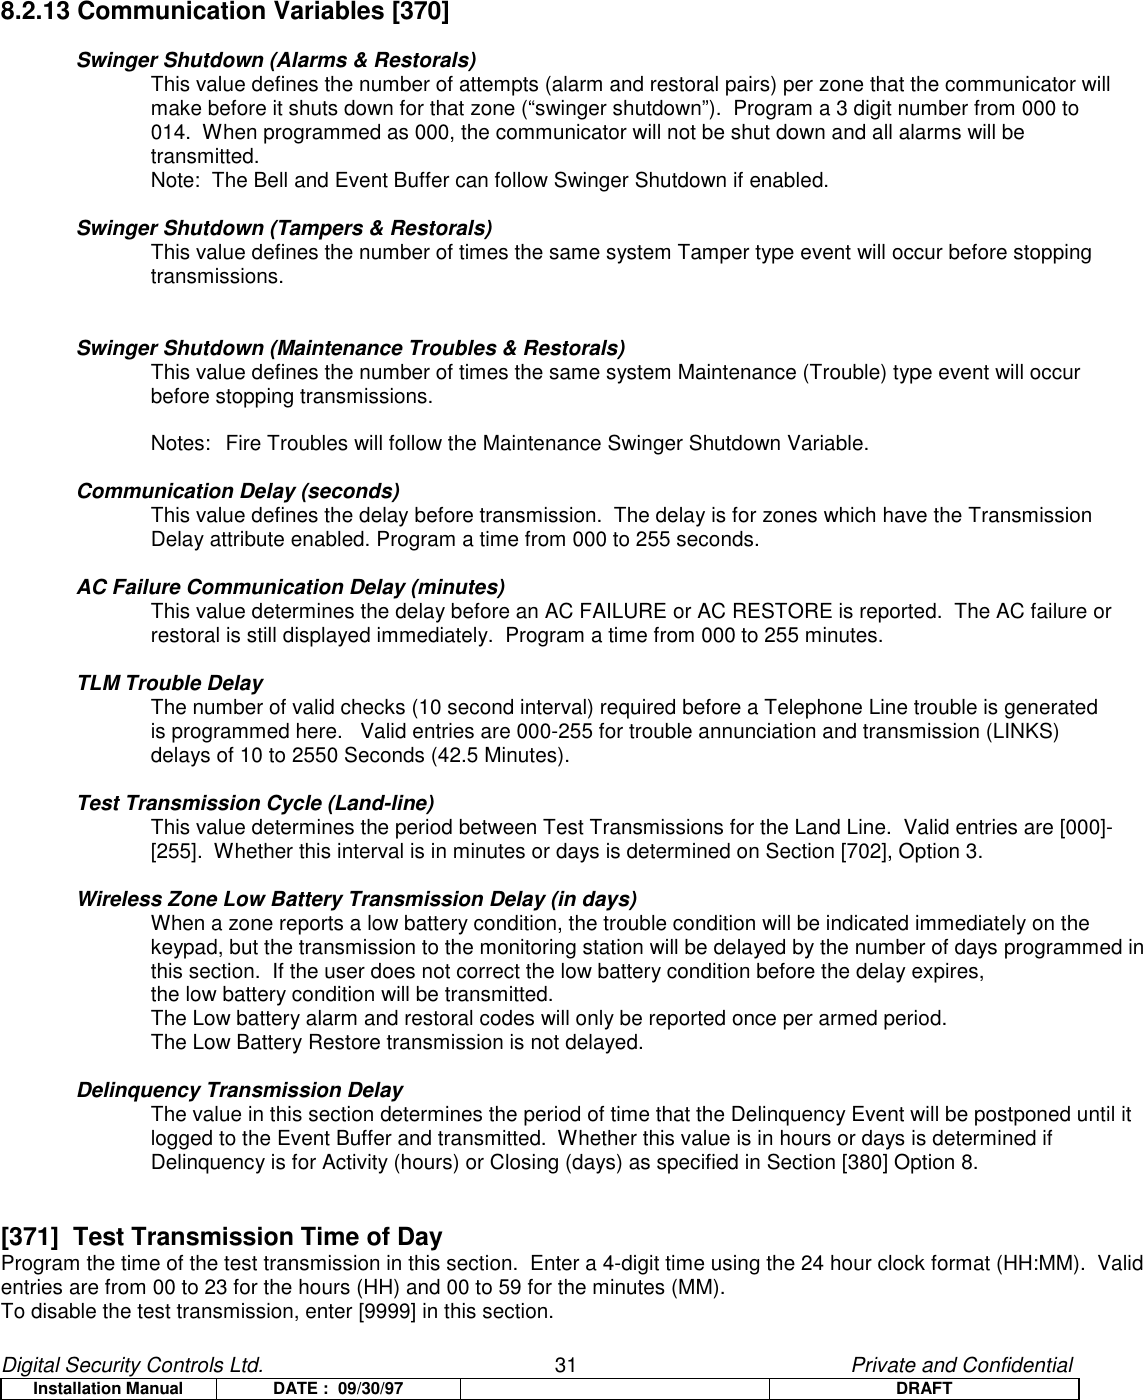 Digital Security Controls Ltd.                   31                                               Private and ConfidentialInstallation Manual DATE :  09/30/97 DRAFT8.2.13 Communication Variables [370]Swinger Shutdown (Alarms &amp; Restorals)This value defines the number of attempts (alarm and restoral pairs) per zone that the communicator will make before it shuts down for that zone (“swinger shutdown”).  Program a 3 digit number from 000 to 014.  When programmed as 000, the communicator will not be shut down and all alarms will be transmitted.Note:  The Bell and Event Buffer can follow Swinger Shutdown if enabled.Swinger Shutdown (Tampers &amp; Restorals)This value defines the number of times the same system Tamper type event will occur before stopping transmissions.Swinger Shutdown (Maintenance Troubles &amp; Restorals)This value defines the number of times the same system Maintenance (Trouble) type event will occur before stopping transmissions.Notes:  Fire Troubles will follow the Maintenance Swinger Shutdown Variable.Communication Delay (seconds)This value defines the delay before transmission.  The delay is for zones which have the Transmission Delay attribute enabled. Program a time from 000 to 255 seconds.AC Failure Communication Delay (minutes)This value determines the delay before an AC FAILURE or AC RESTORE is reported.  The AC failure or restoral is still displayed immediately.  Program a time from 000 to 255 minutes.TLM Trouble DelayThe number of valid checks (10 second interval) required before a Telephone Line trouble is generated is programmed here.   Valid entries are 000-255 for trouble annunciation and transmission (LINKS) delays of 10 to 2550 Seconds (42.5 Minutes).Test Transmission Cycle (Land-line)This value determines the period between Test Transmissions for the Land Line.  Valid entries are [000]-[255].  Whether this interval is in minutes or days is determined on Section [702], Option 3.Wireless Zone Low Battery Transmission Delay (in days)When a zone reports a low battery condition, the trouble condition will be indicated immediately on thekeypad, but the transmission to the monitoring station will be delayed by the number of days programmed inthis section.  If the user does not correct the low battery condition before the delay expires,the low battery condition will be transmitted.The Low battery alarm and restoral codes will only be reported once per armed period.The Low Battery Restore transmission is not delayed.Delinquency Transmission DelayThe value in this section determines the period of time that the Delinquency Event will be postponed until itlogged to the Event Buffer and transmitted.  Whether this value is in hours or days is determined ifDelinquency is for Activity (hours) or Closing (days) as specified in Section [380] Option 8.[371]  Test Transmission Time of DayProgram the time of the test transmission in this section.  Enter a 4-digit time using the 24 hour clock format (HH:MM).  Validentries are from 00 to 23 for the hours (HH) and 00 to 59 for the minutes (MM).To disable the test transmission, enter [9999] in this section.